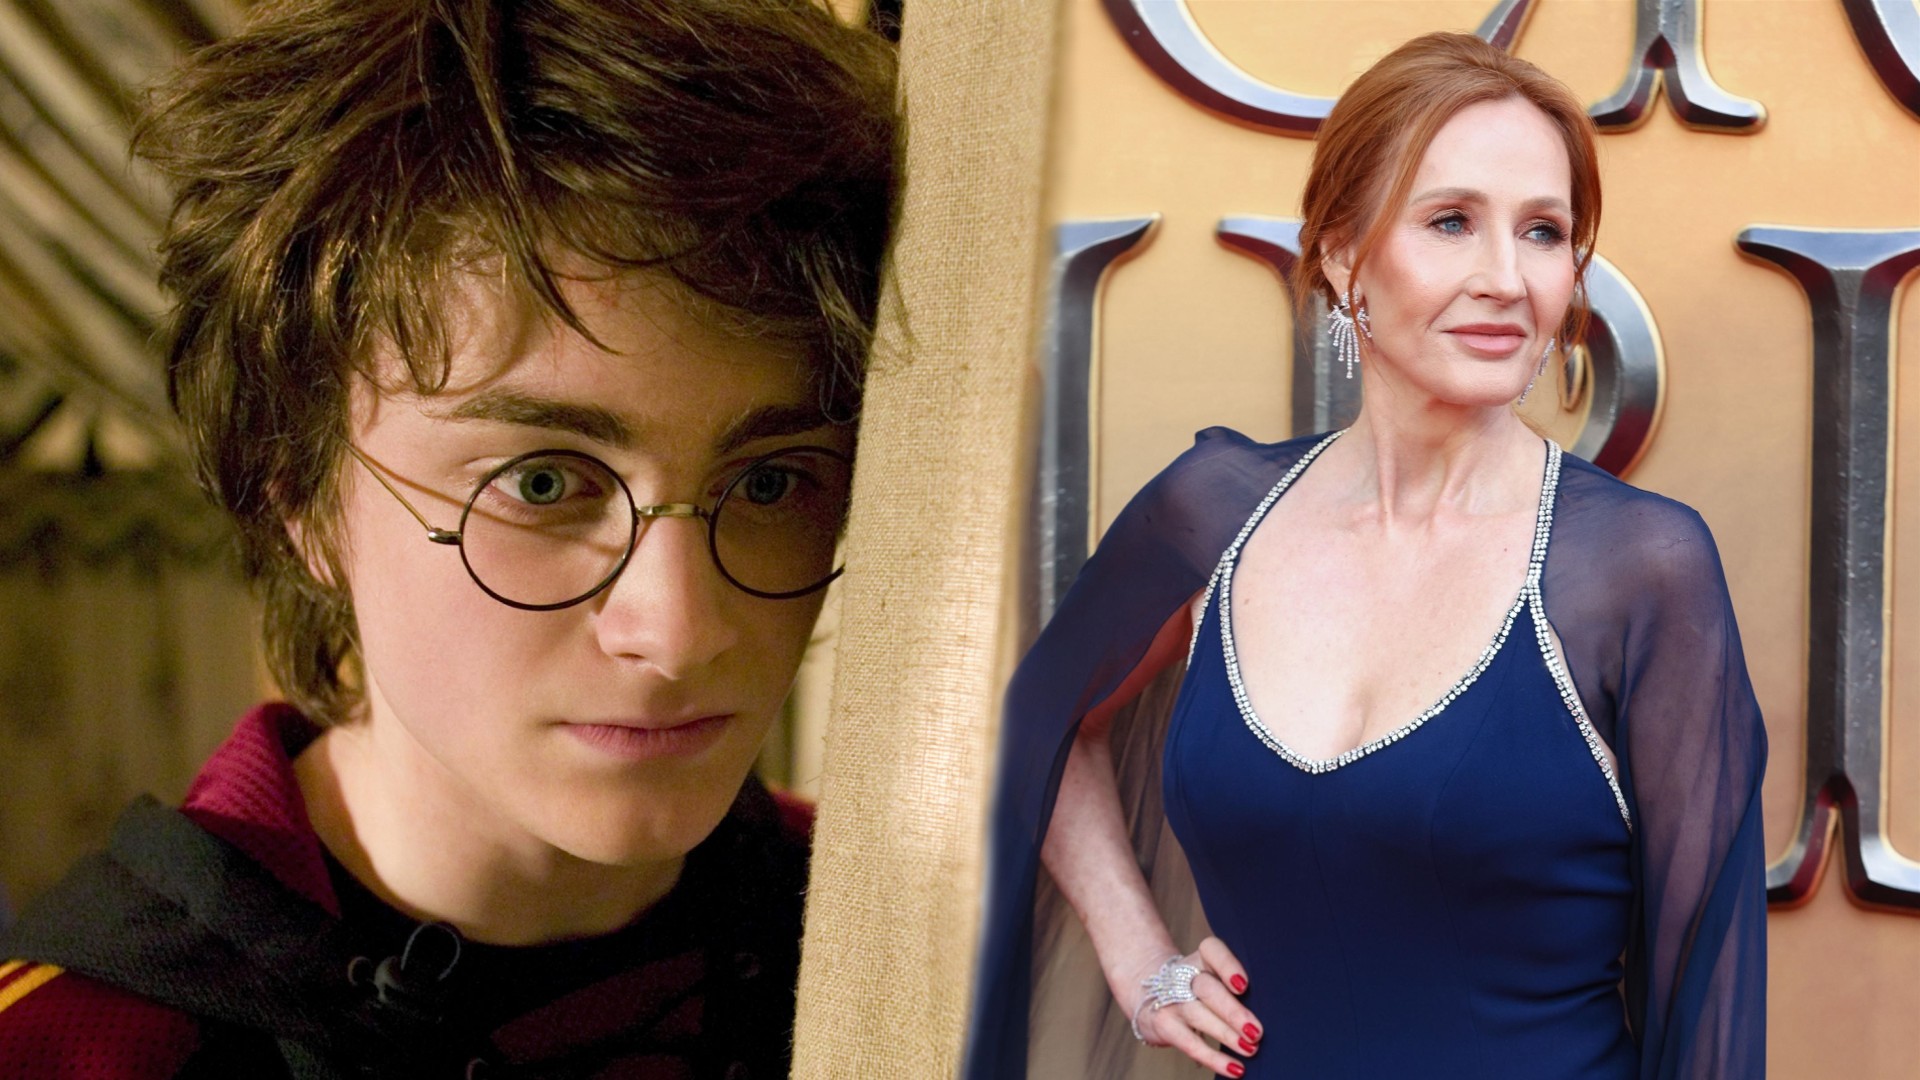 Harry Potter Remake is Due: It's Time We Make That Fantasy World Our Own, Not JK Rowling's